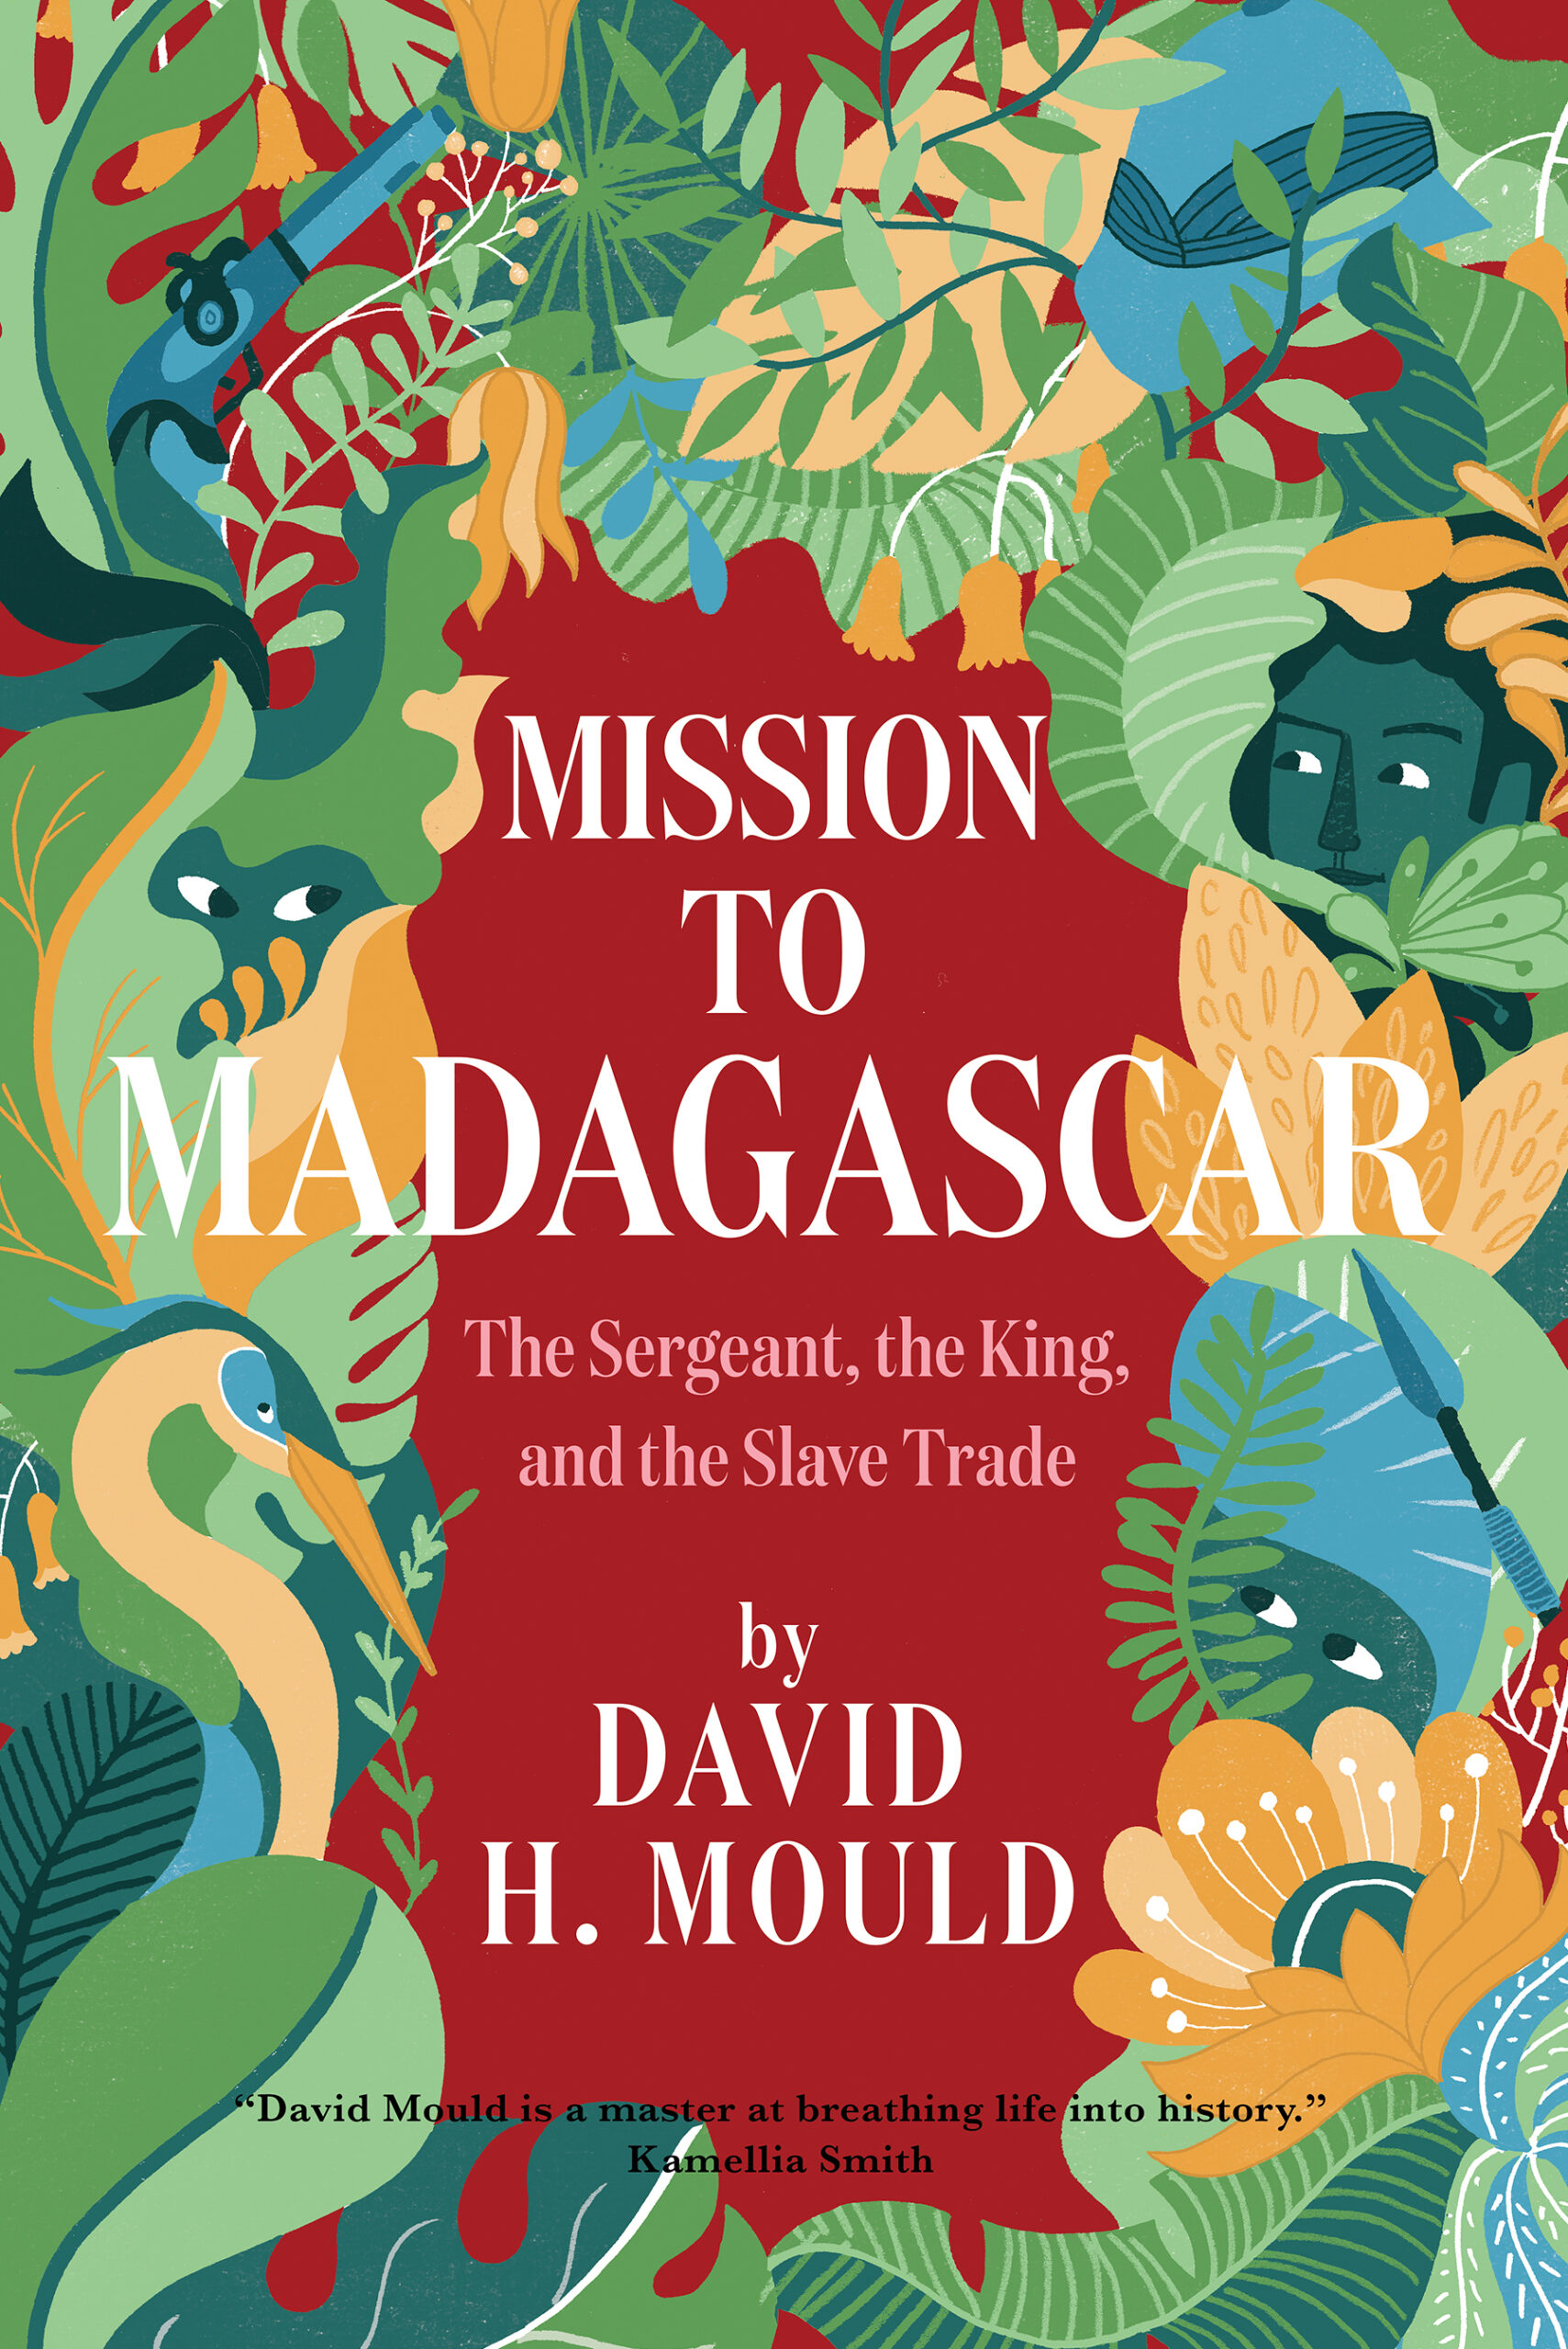 Mission to Madagascar: The Sergeant, the King, and the Slave Trade